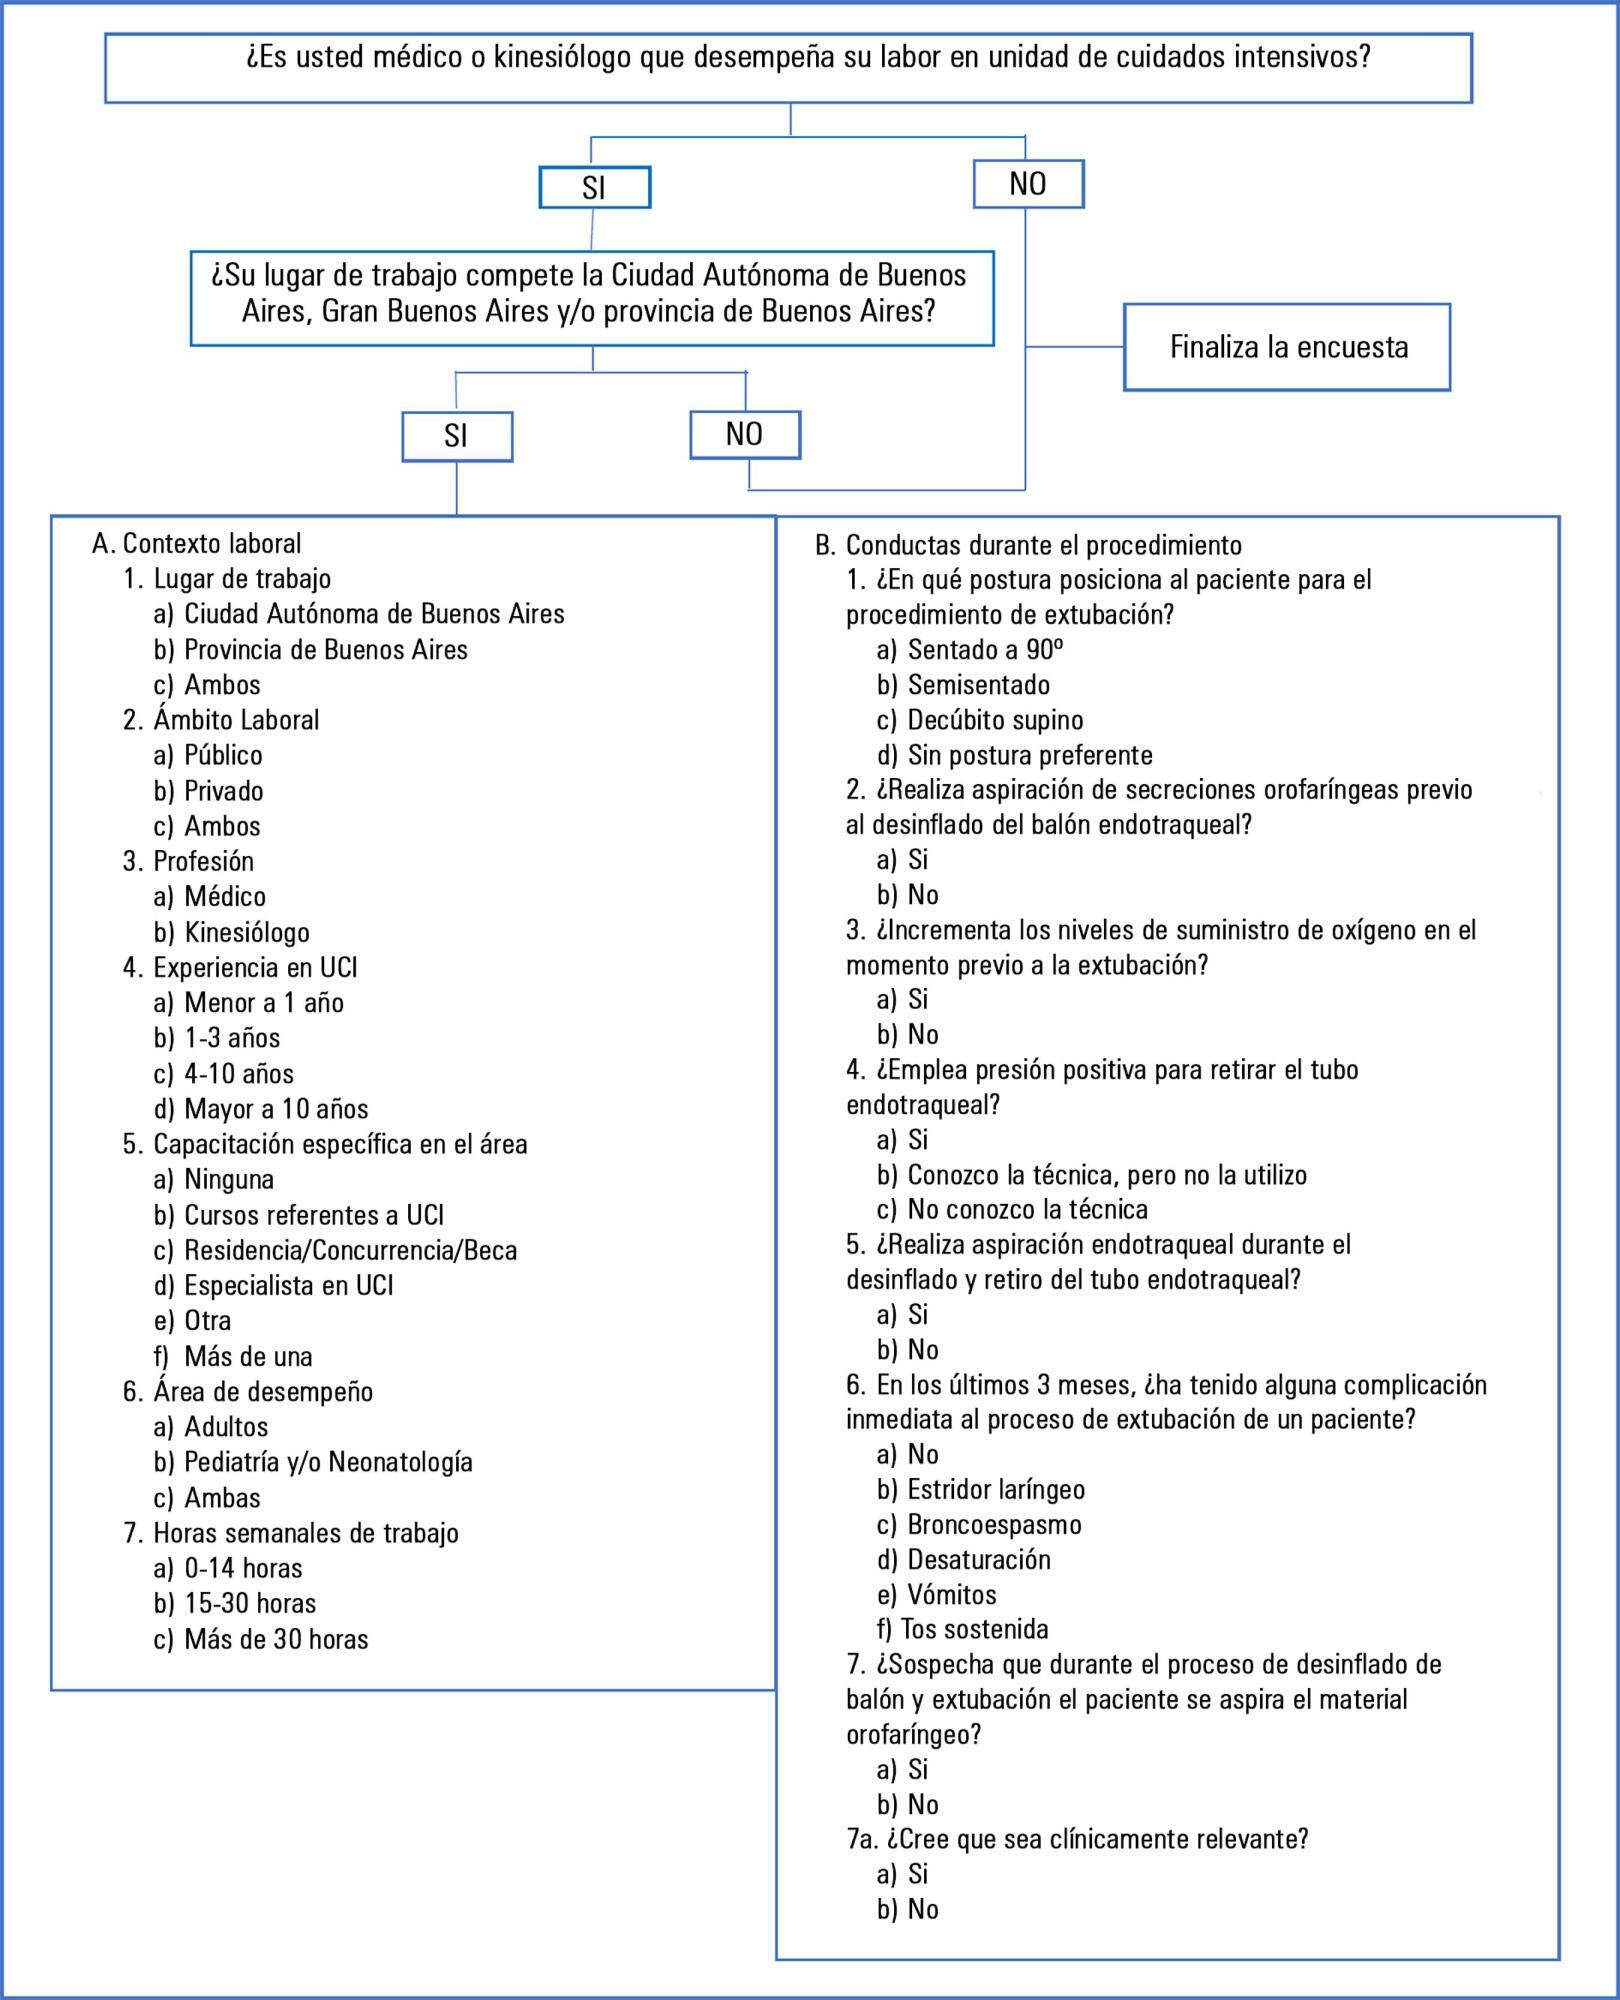 Survey on the extubation procedure in intensive care units in Buenos Aires, Argentina